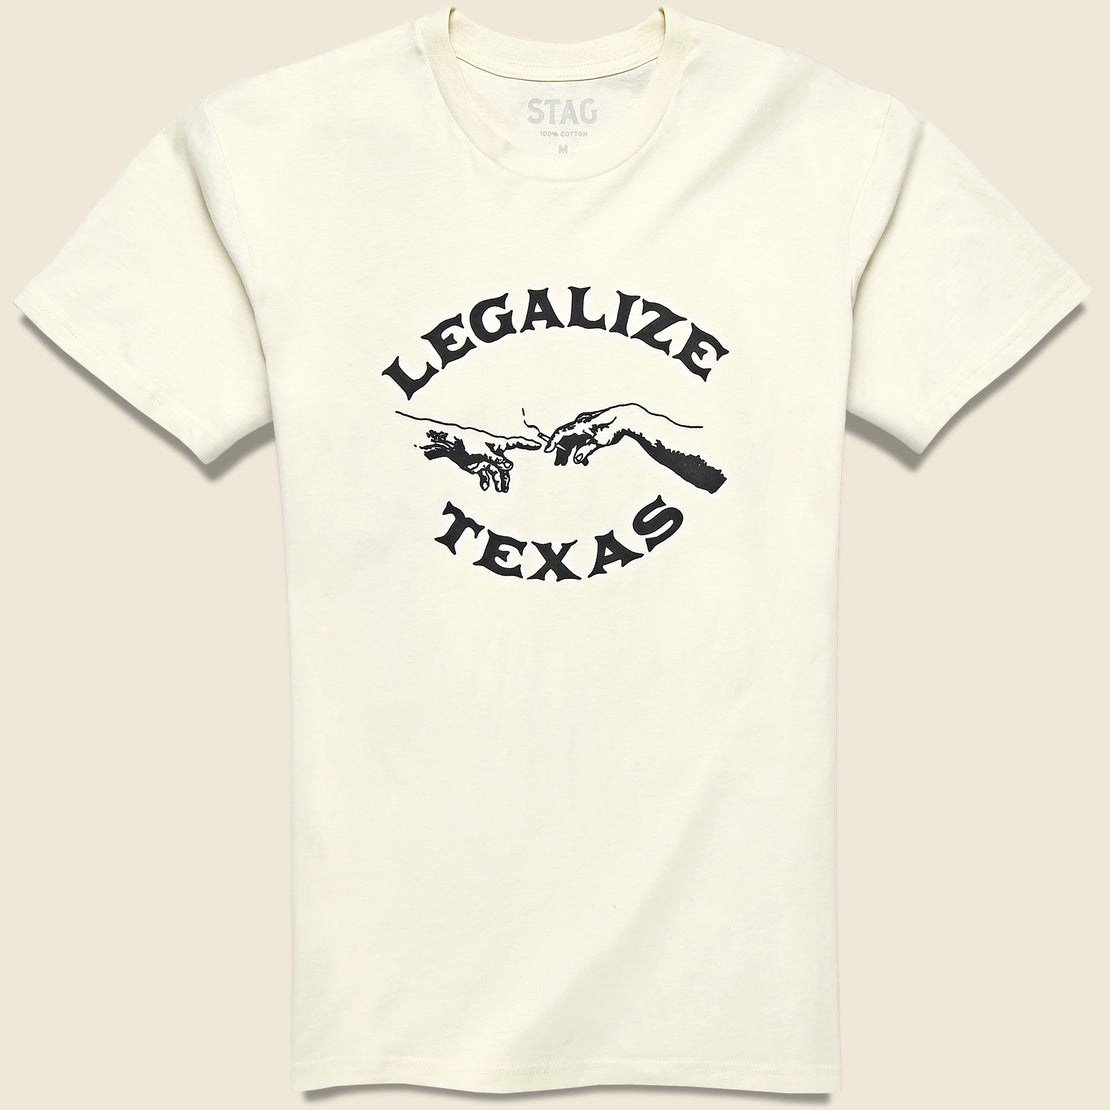 STAG Graphic Tee - Legalize Texas